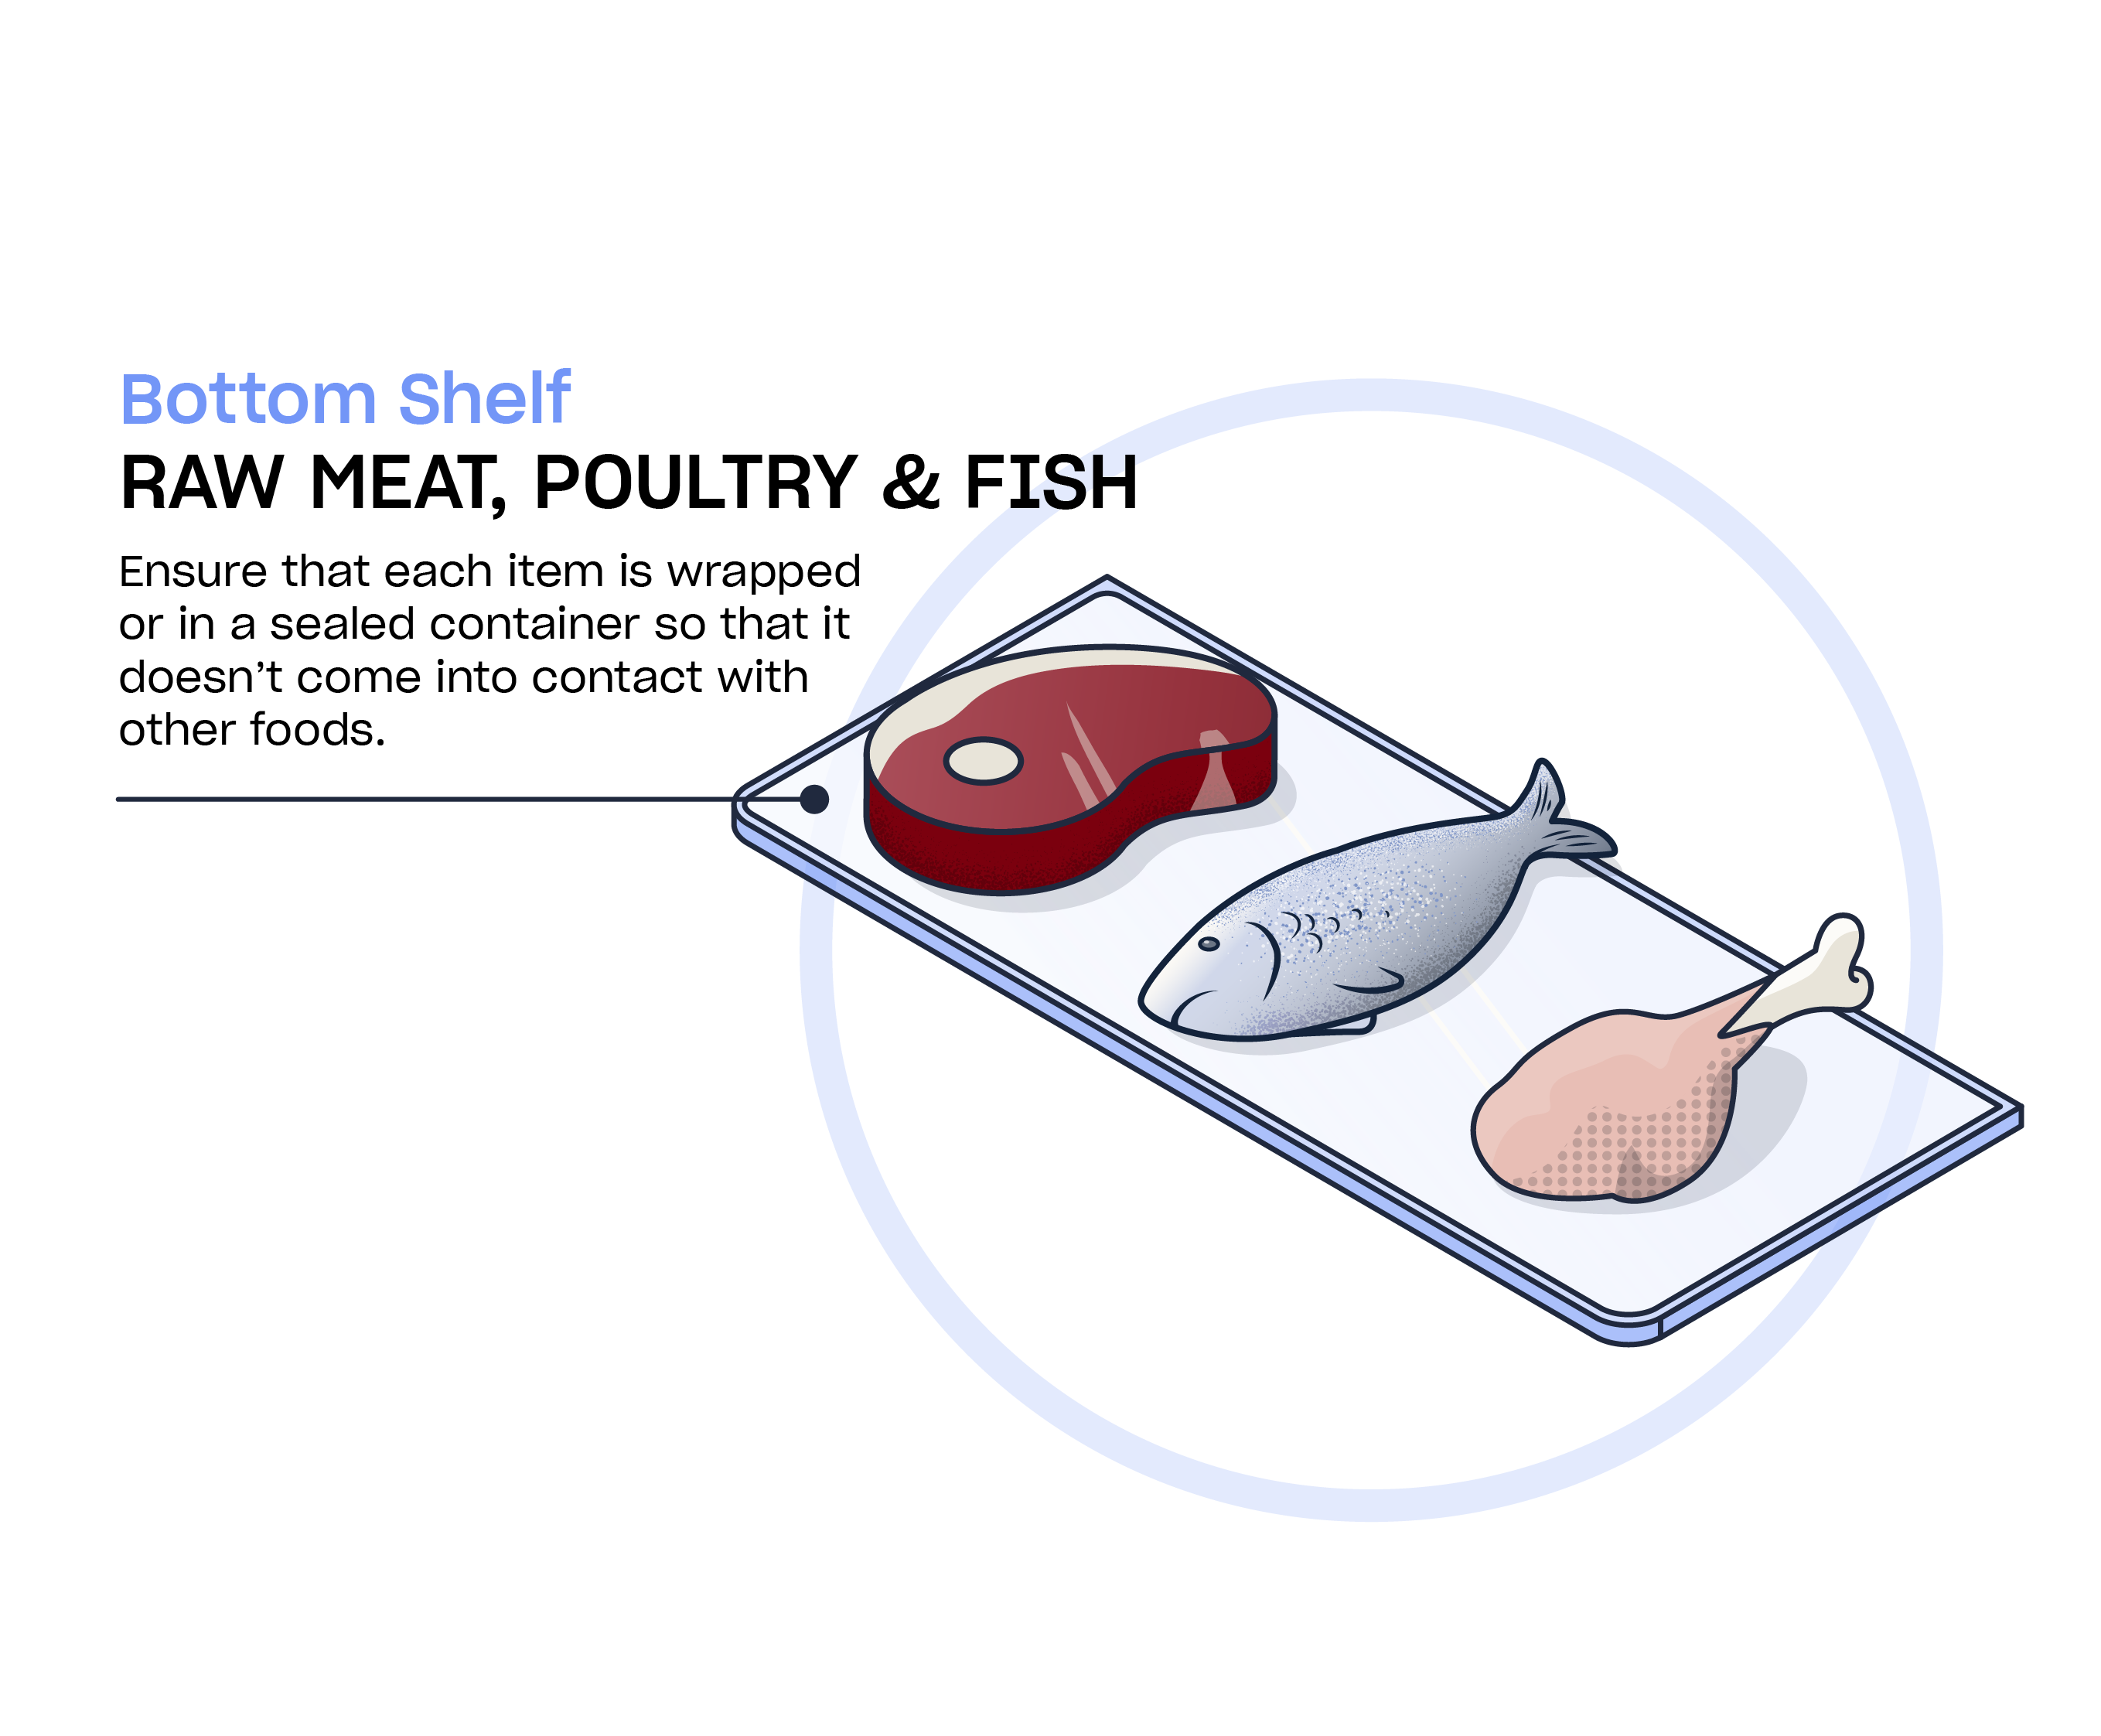 Storing Fish, Meat and Poultry Safely on a Commercial Scale